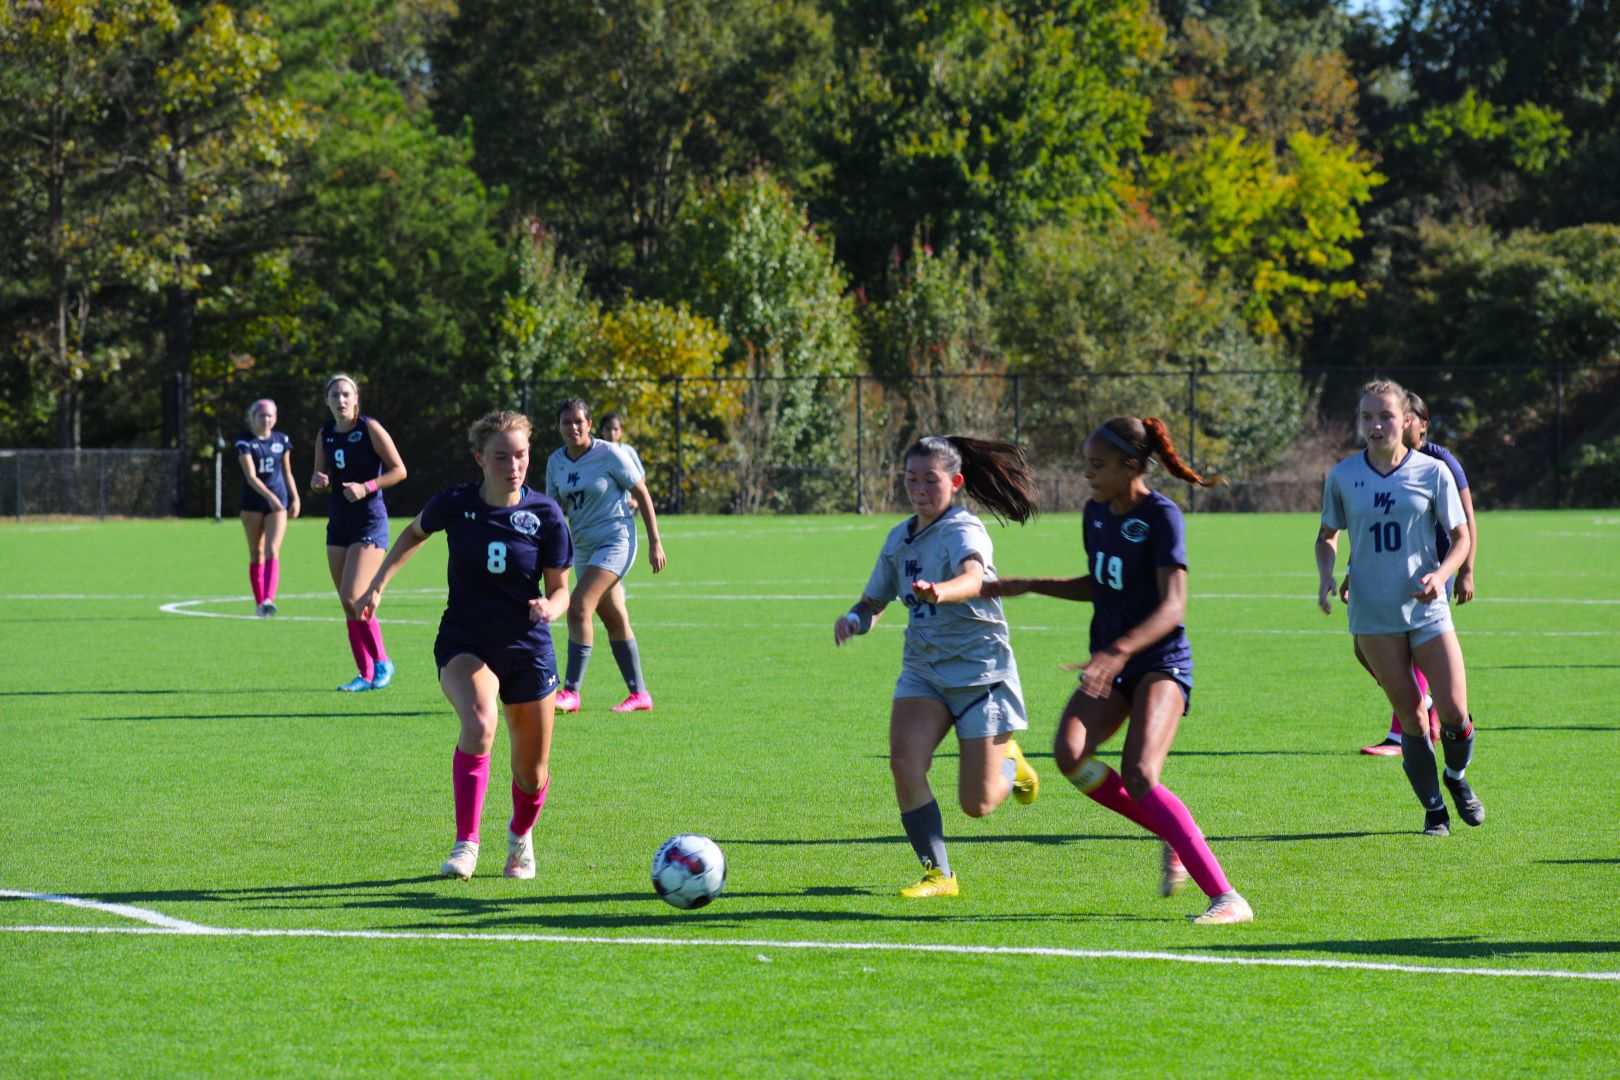 Women's Soccer soars into championship game with 4-1 win over Louisburg